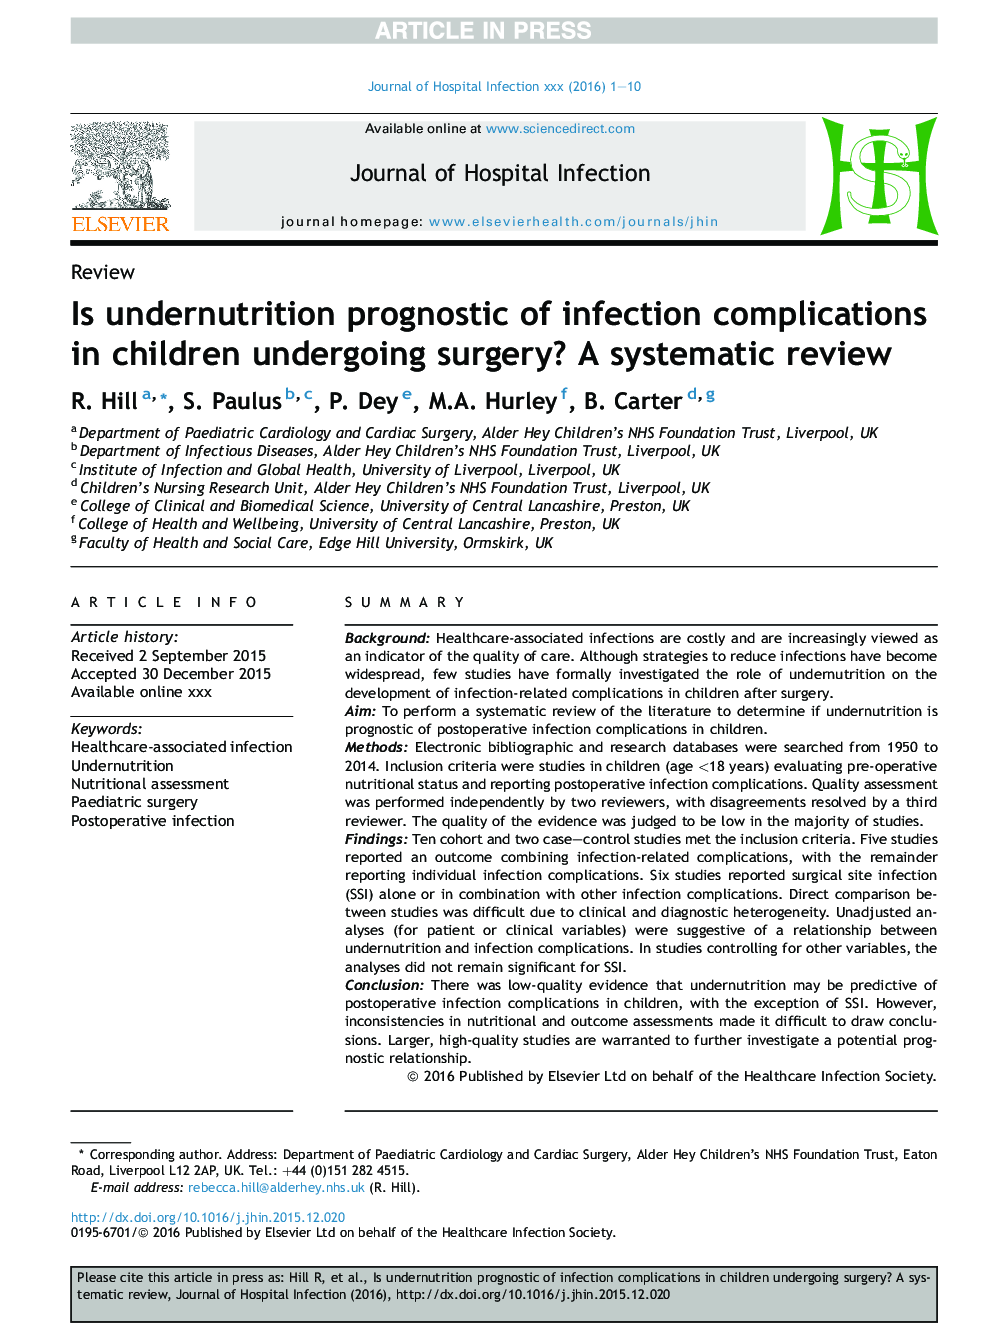 Is undernutrition prognostic of infection complications in children undergoing surgery? A systematic review